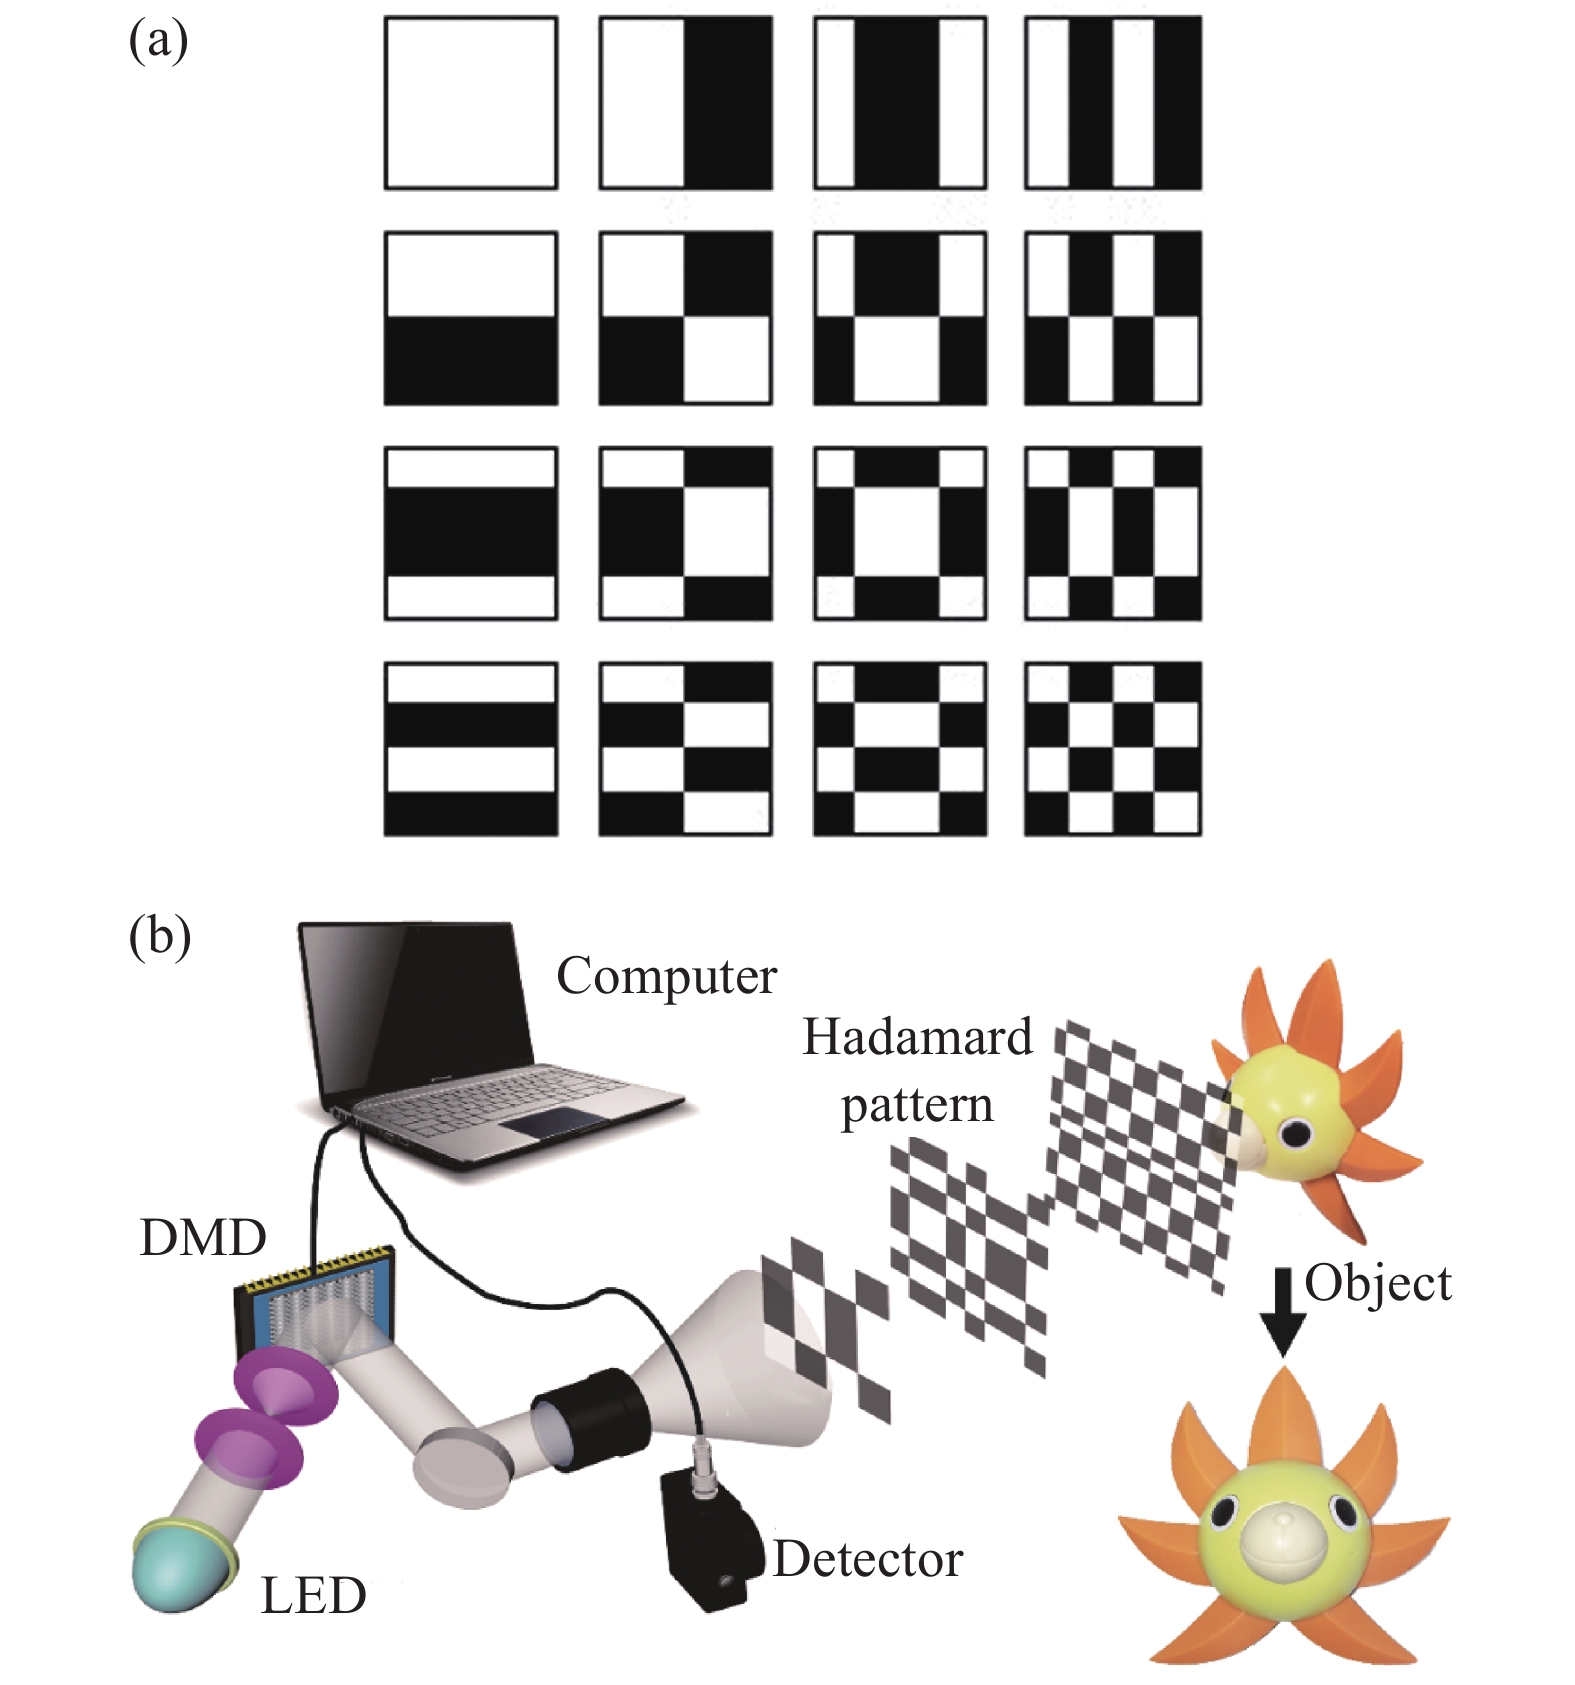 The 16 Hadamard matrices for imaging pixels 4 × 4 and the schematic of single-pixel imaging with Hadamard patterns